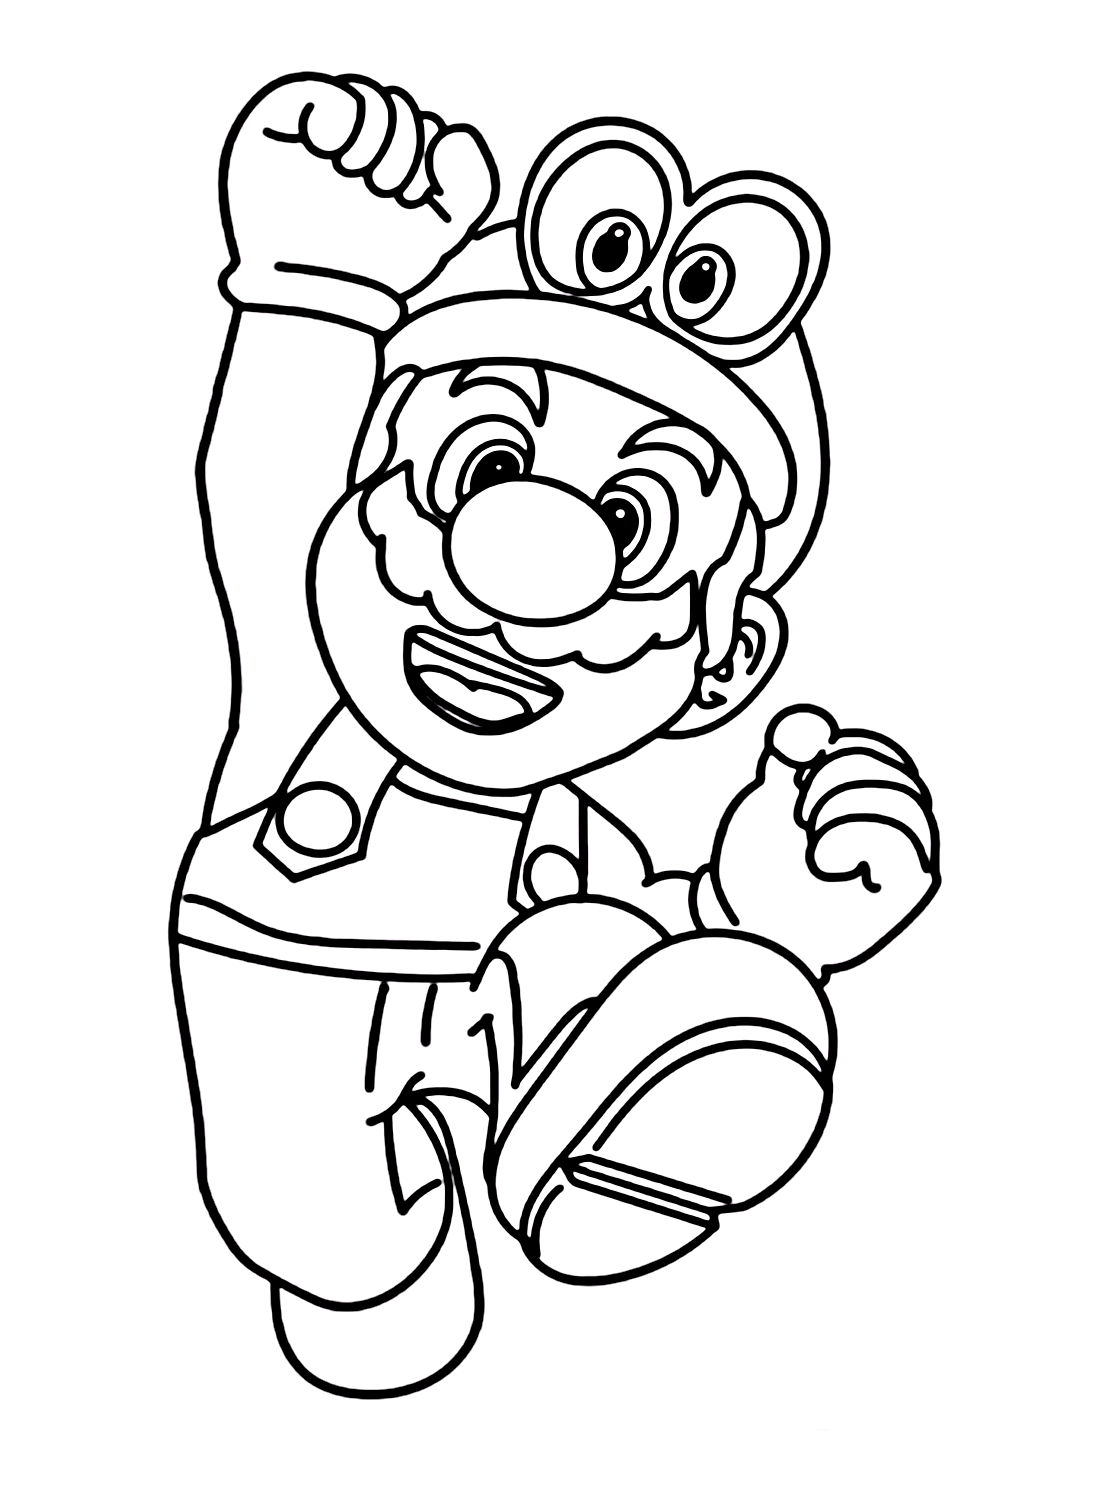 Bowser Coloring Pages - Best Coloring Pages For Kids  Super mario coloring  pages, Mario coloring pages, Castle coloring page